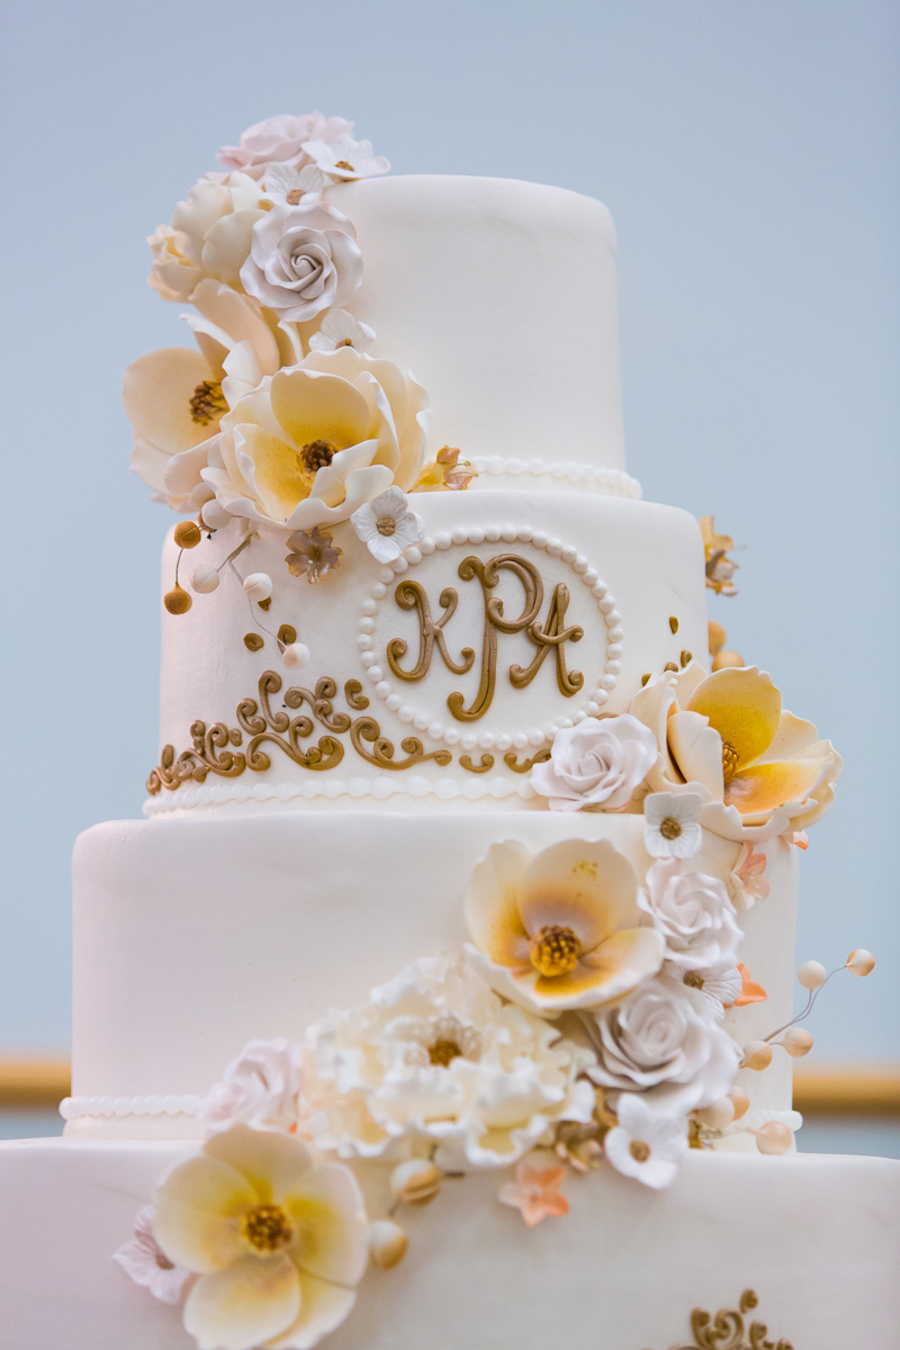 4 Tiered, White Fondant Monogrammed Wedding Cake with White and Gold Edible Flowers | Tampa Wedding Cake Alessi Bakeries